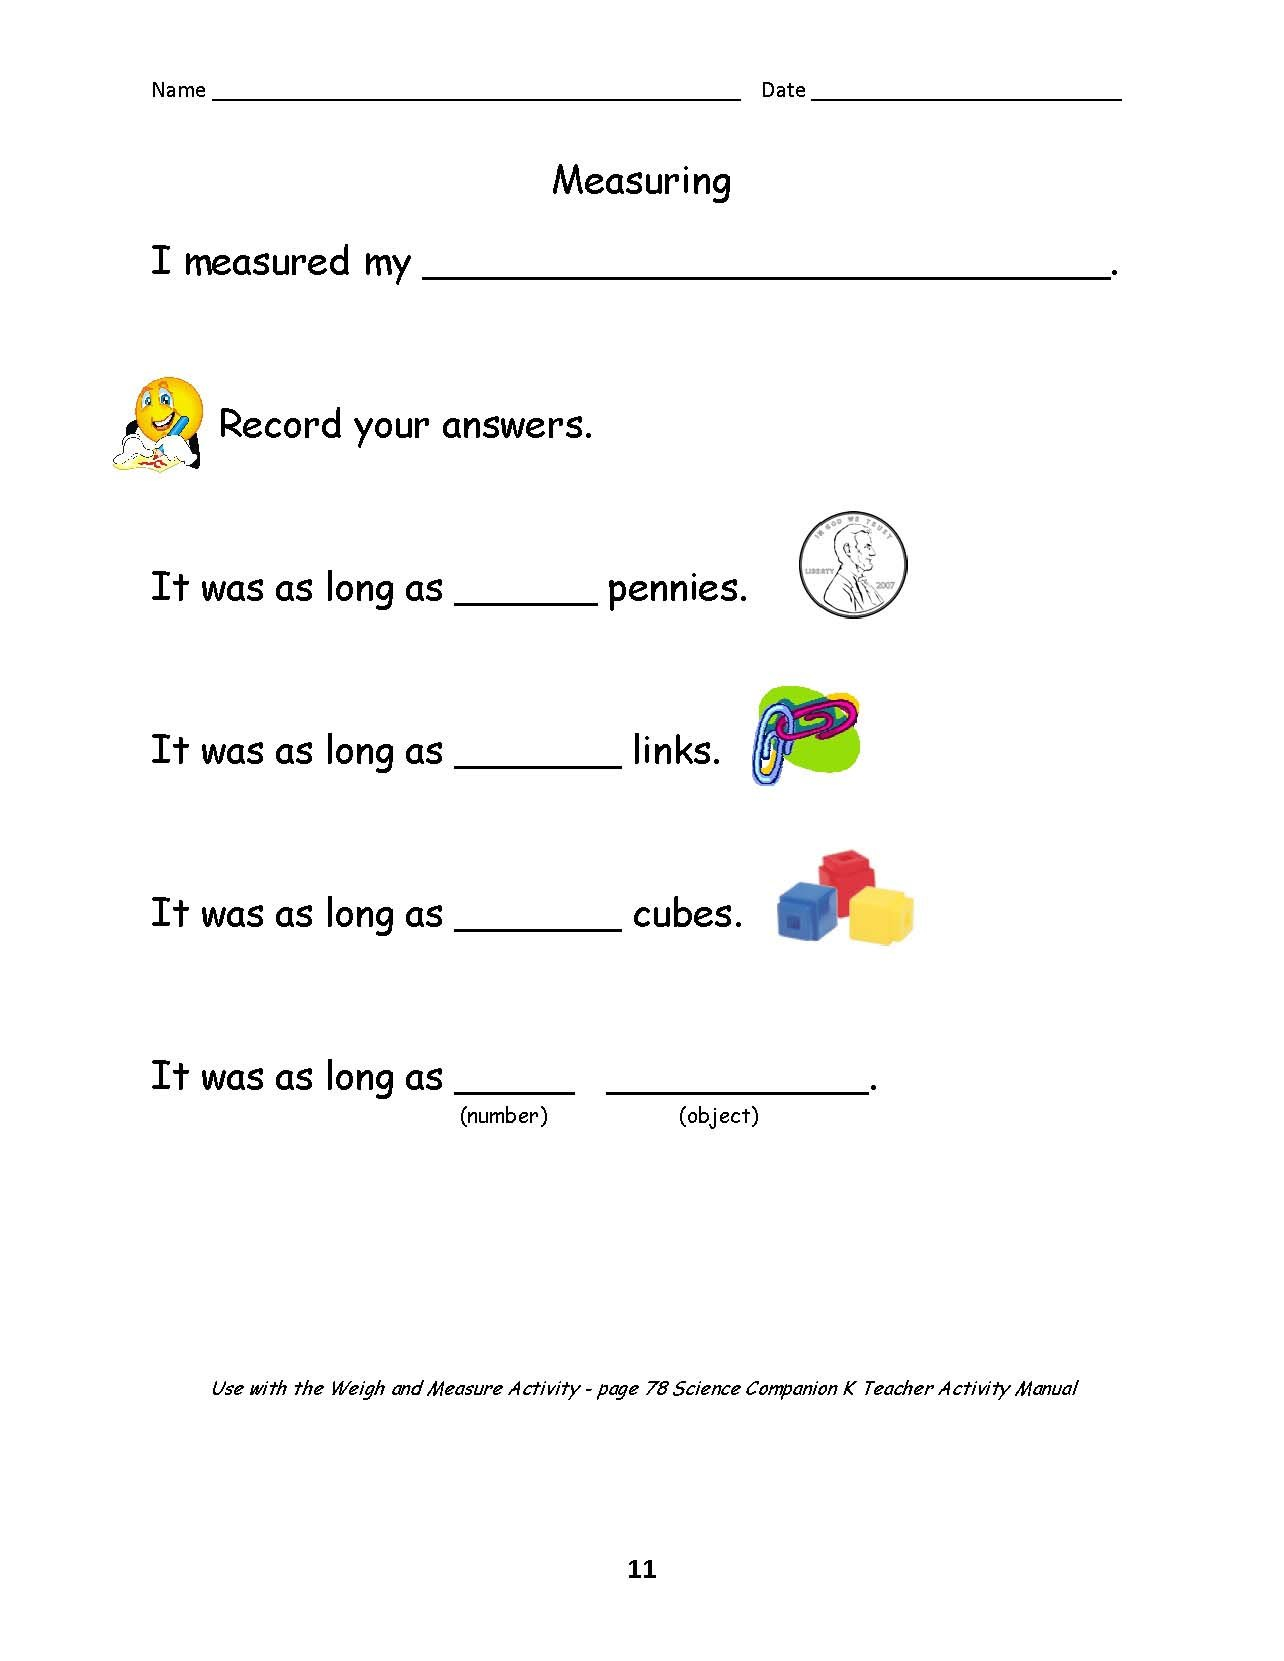 Science And Children Online Connections For Internet Safety Worksheets For Elementary Students